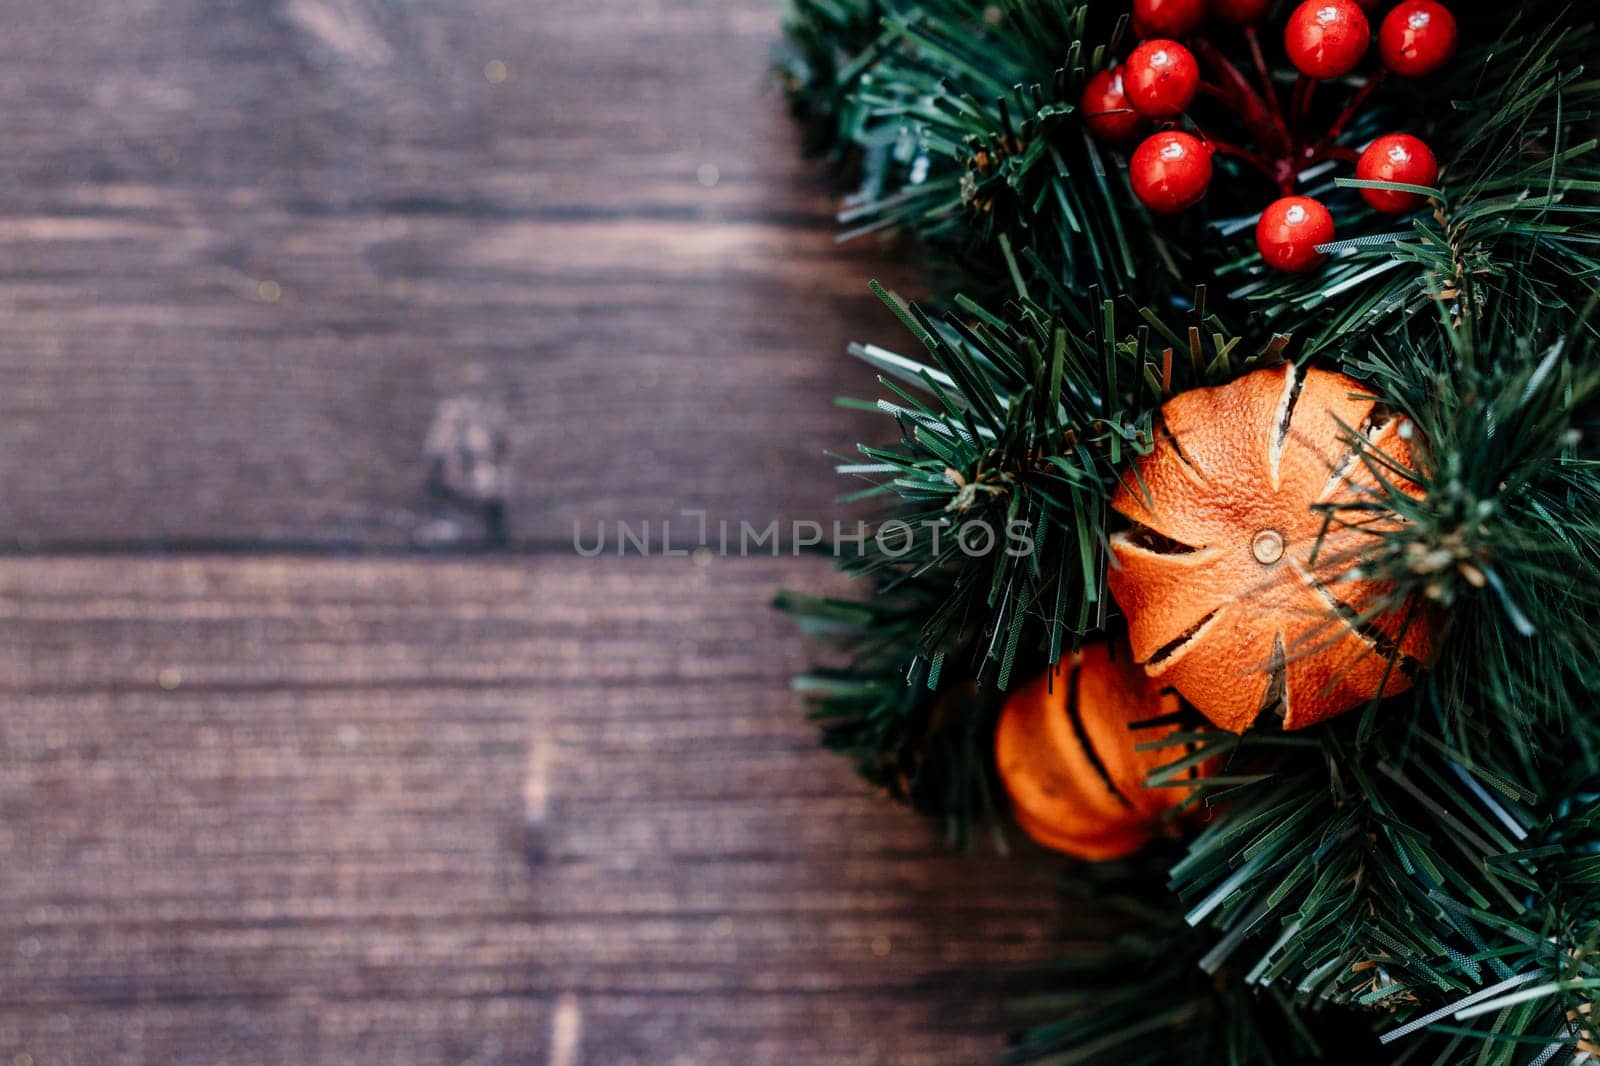 christmas background pine tree with dried tangerines wooden background. The combination of the pine tree, ornaments, and greenery creates a classic and cozy setting. by Matiunina